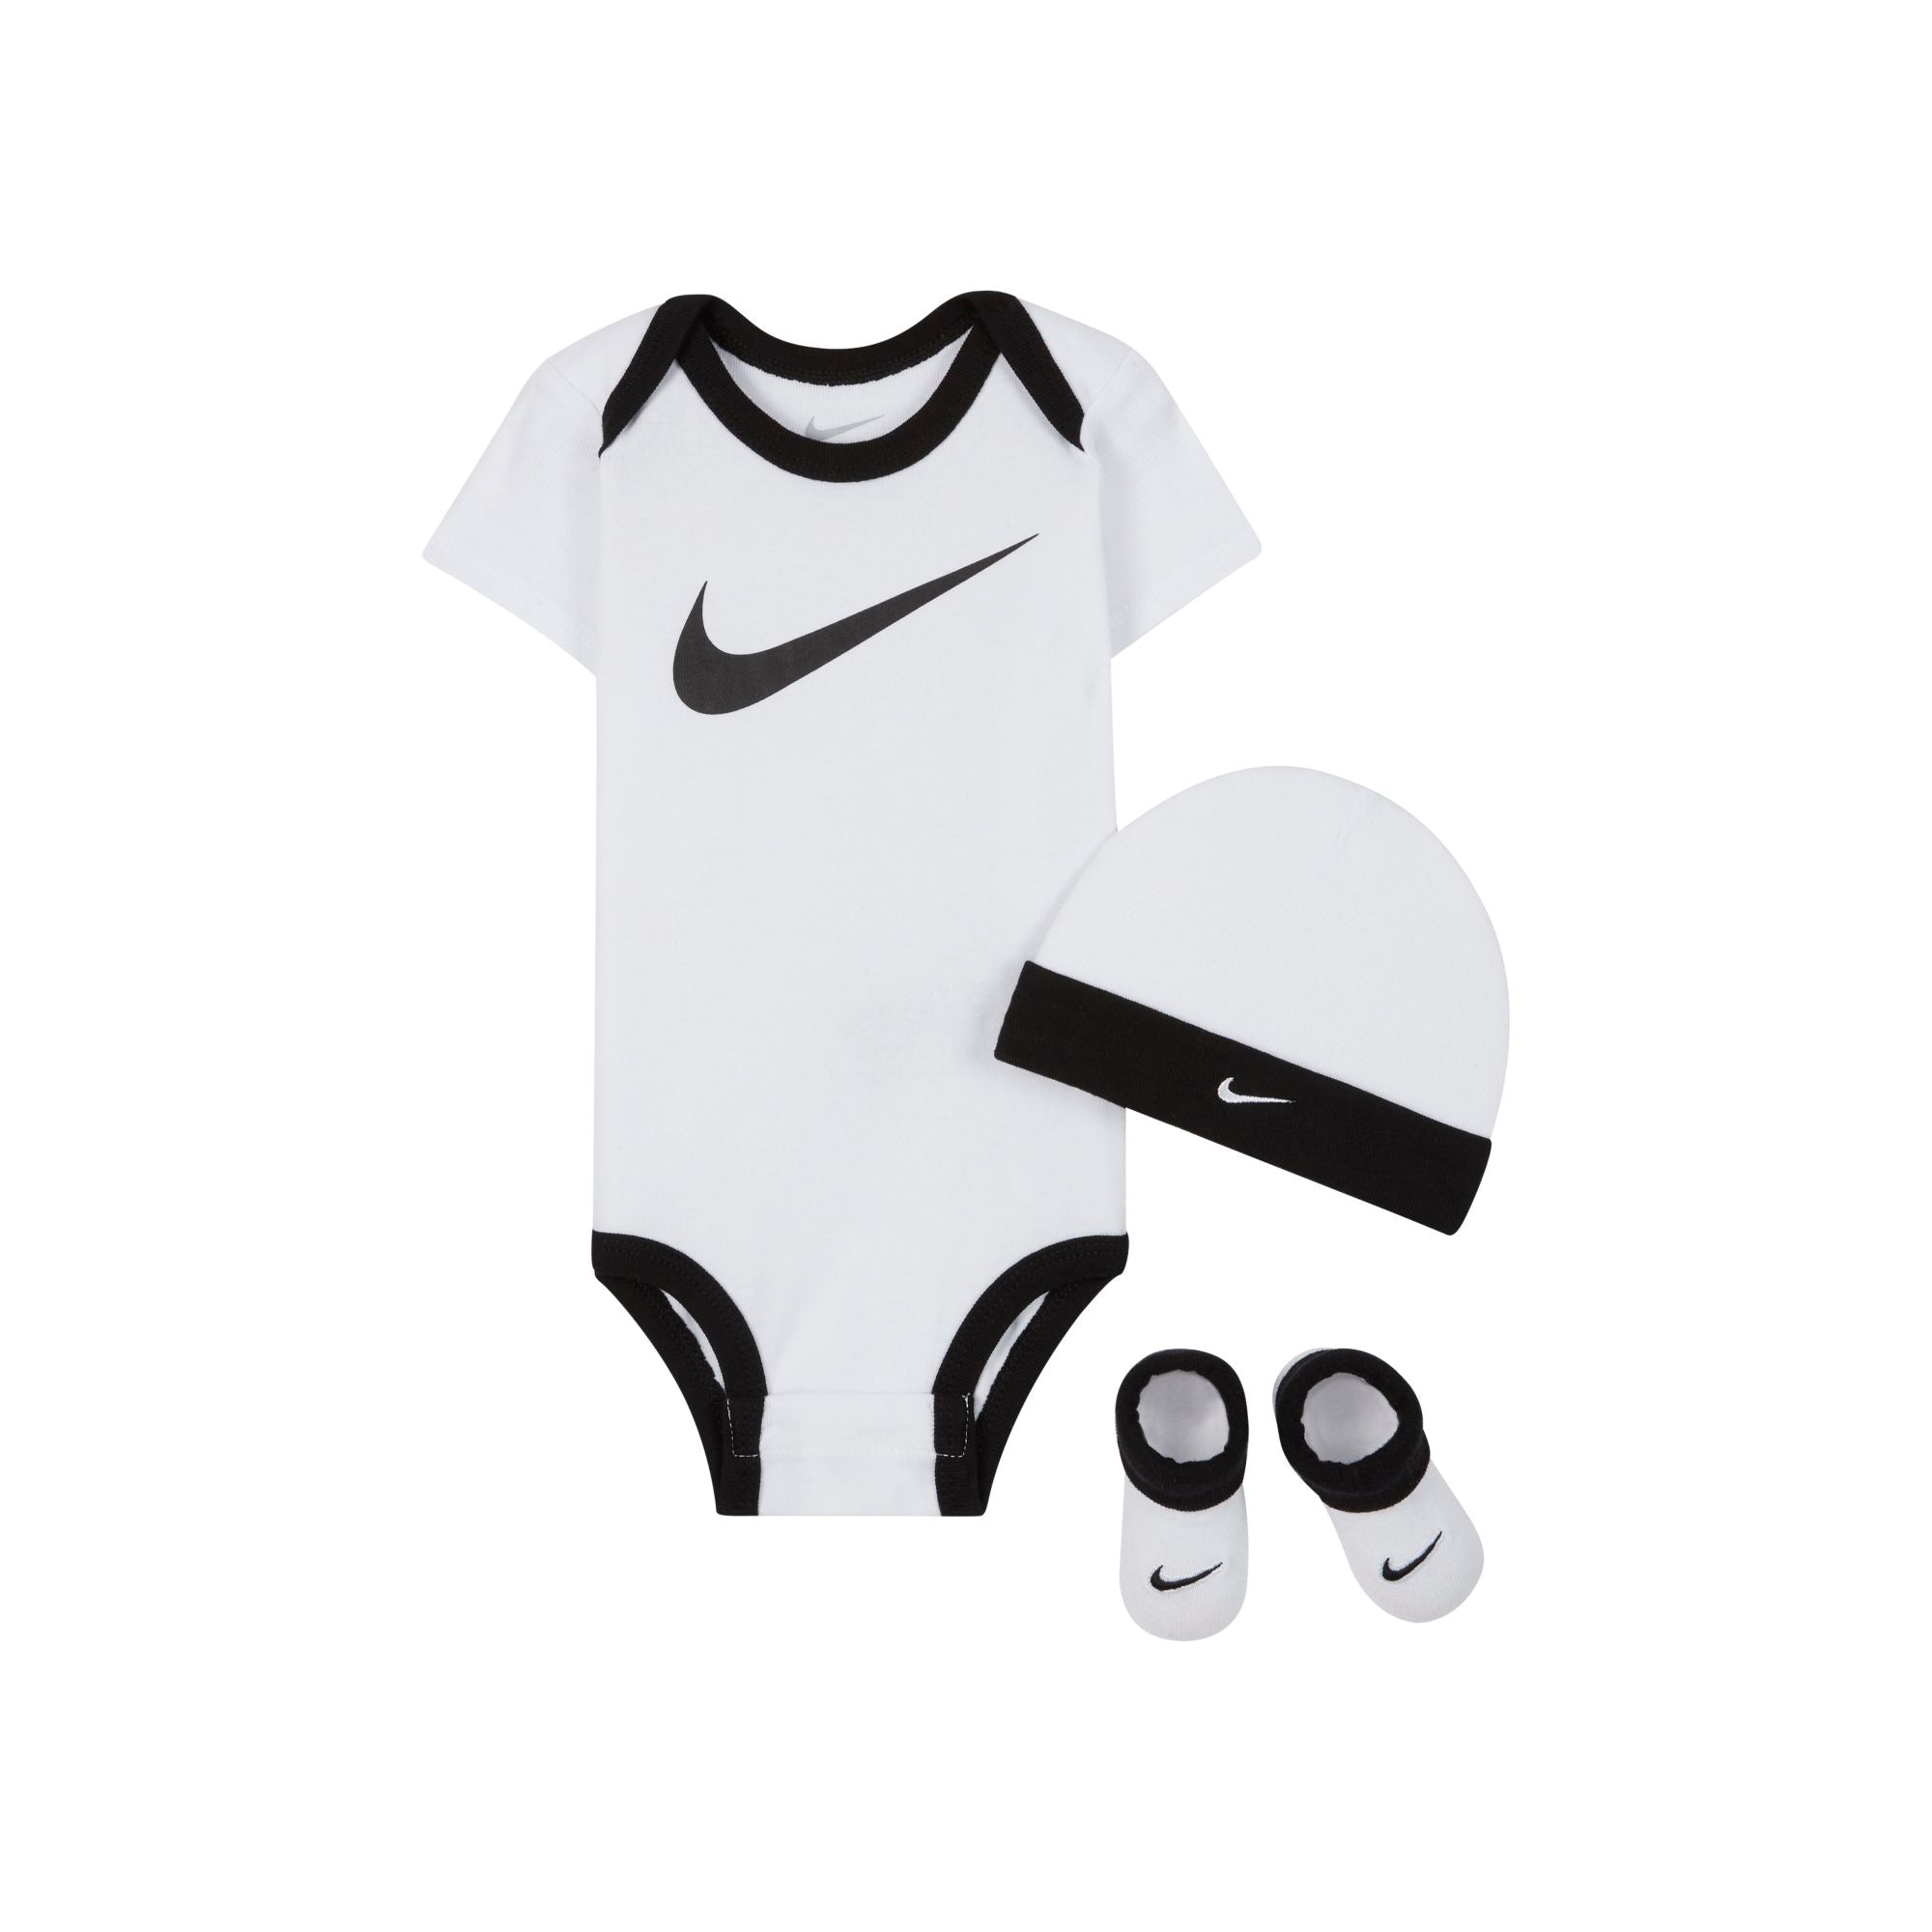 [MN0072-001] Baby Nike Bodysuit, Hat and Booties 3-PC Box Set